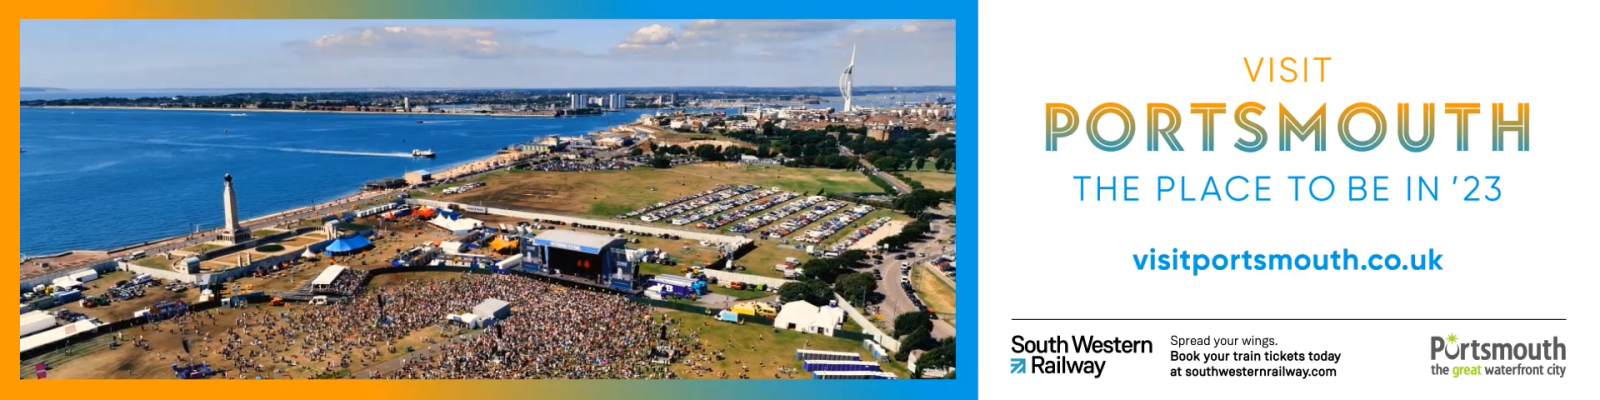 Banner image showing an aerial photograph of Victorious Festival alongside the wording: Visit Portsmouth: The place to be in '23